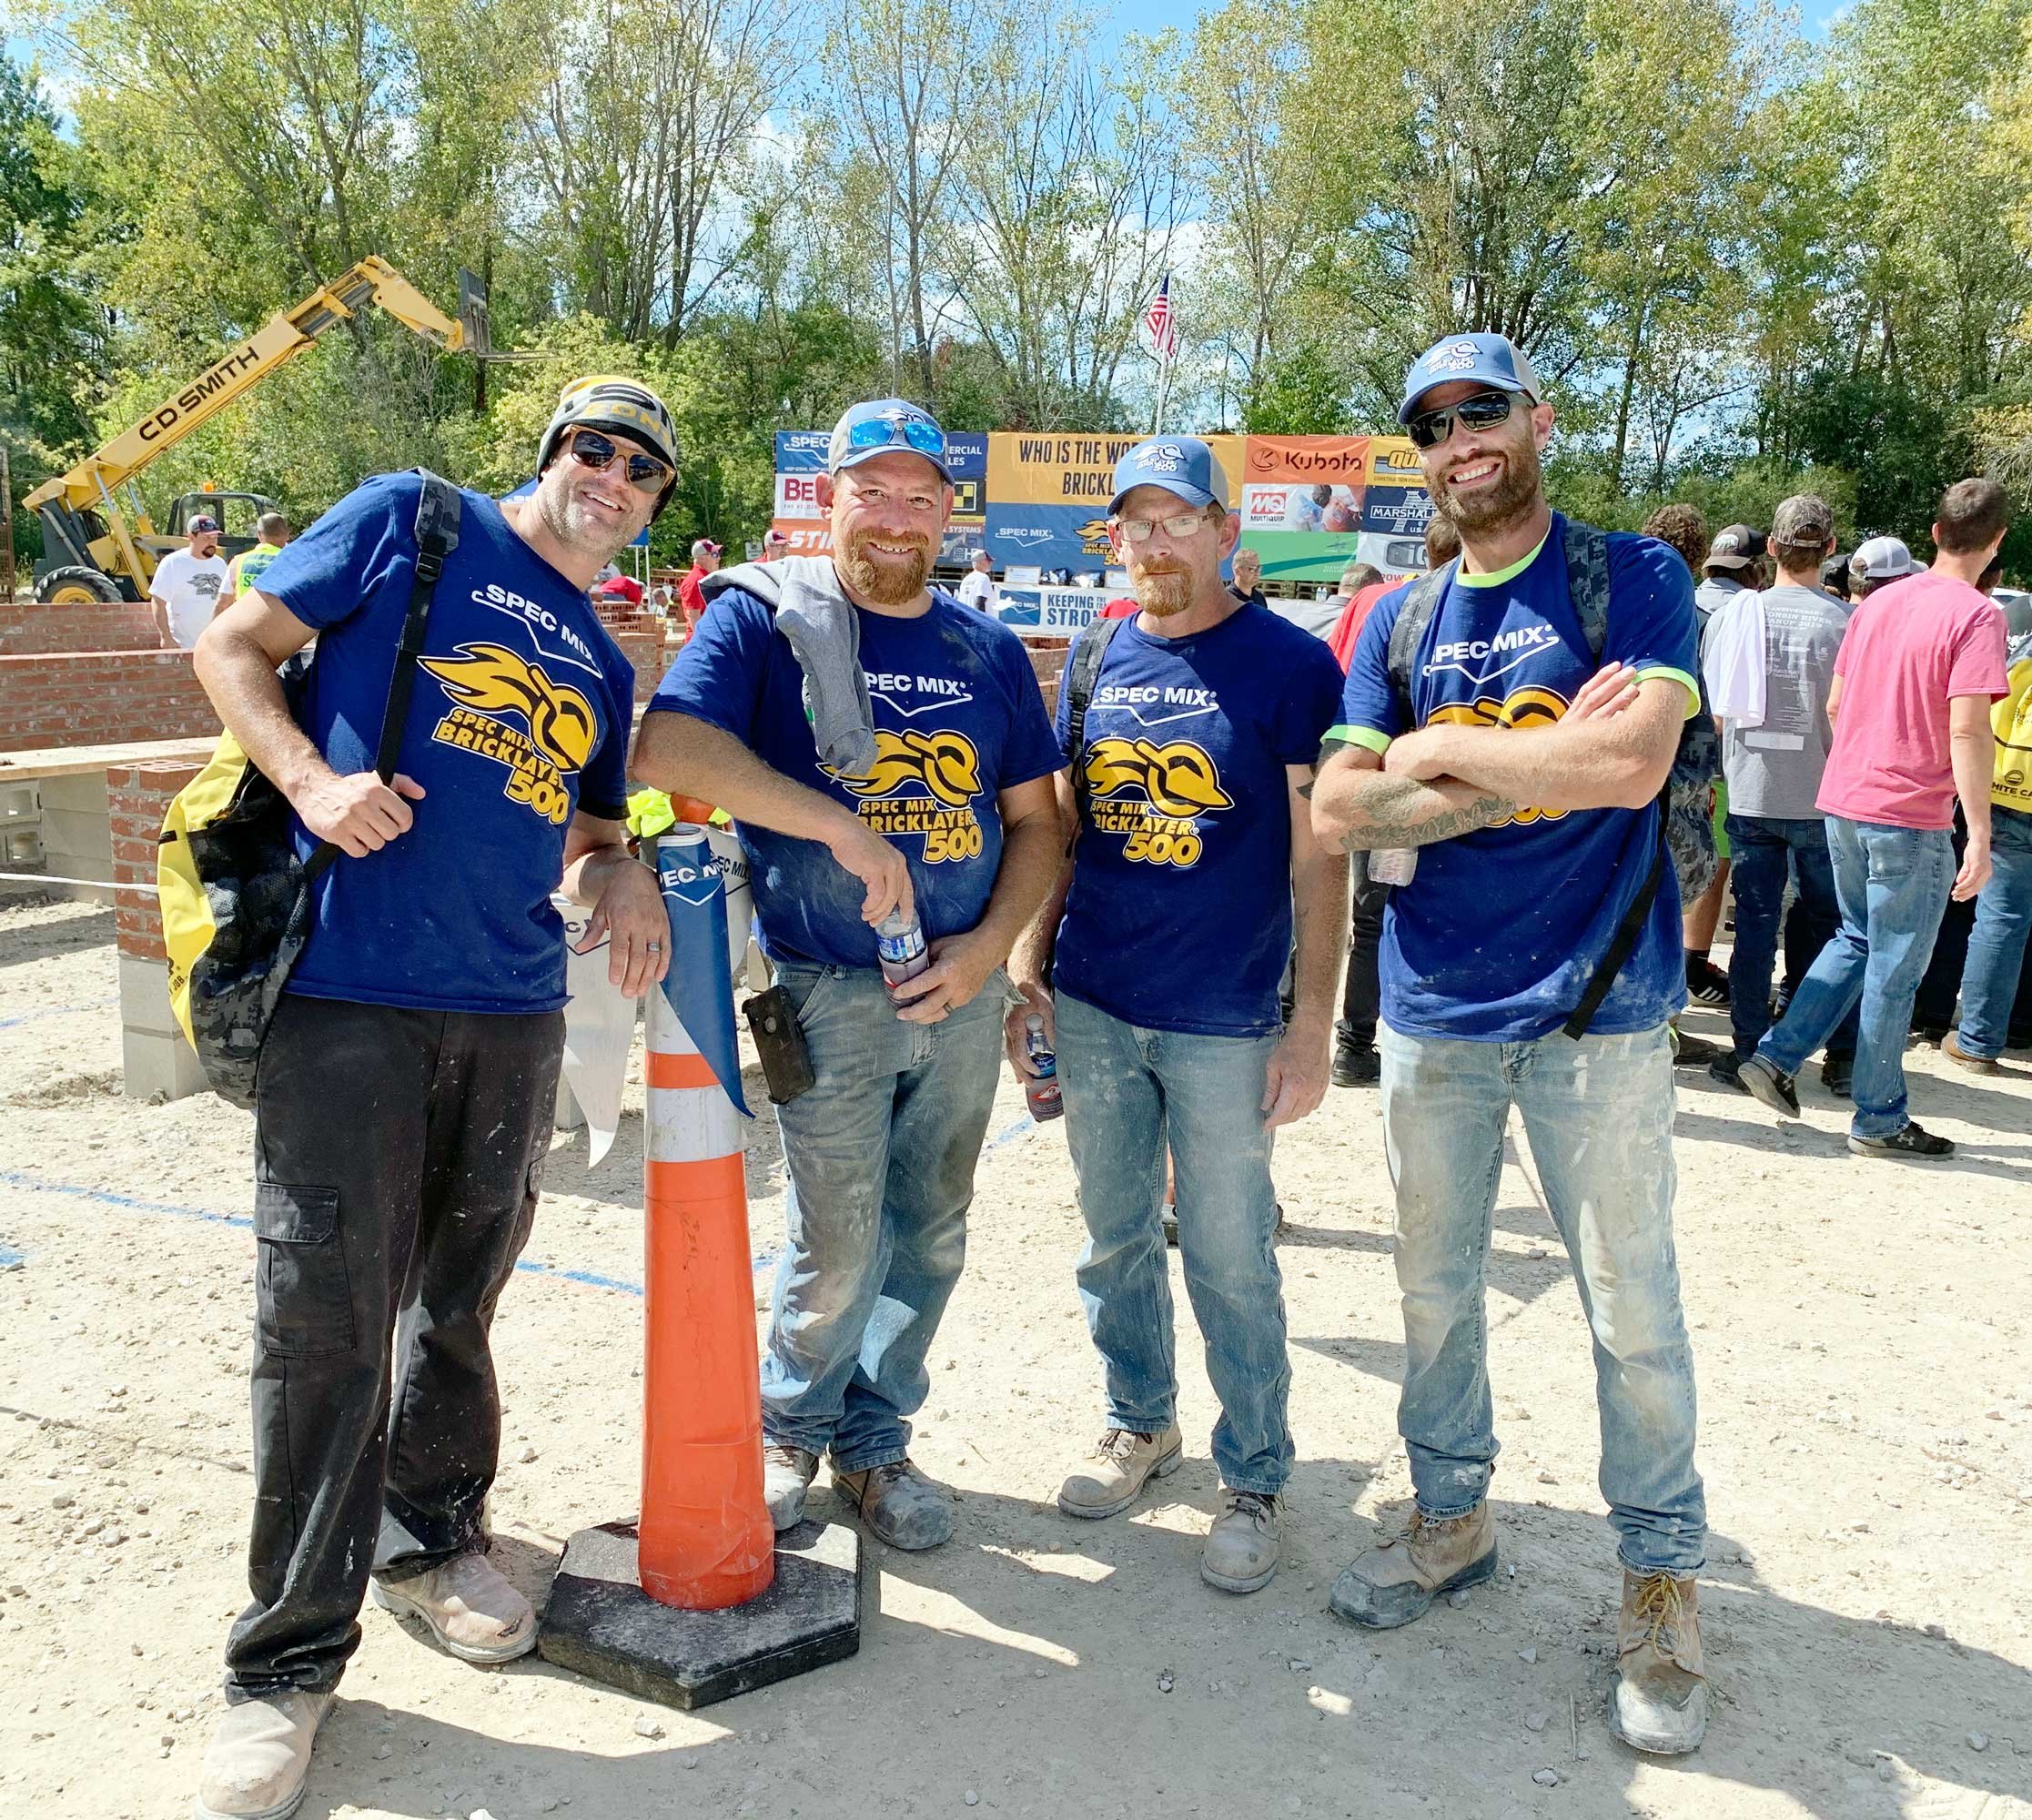 Two C.D. Smith Masonry Construction Teams competed in the 2021 SPEC MIX BRICKLAYER 500 Regional Series at Fond du Lac Stone 